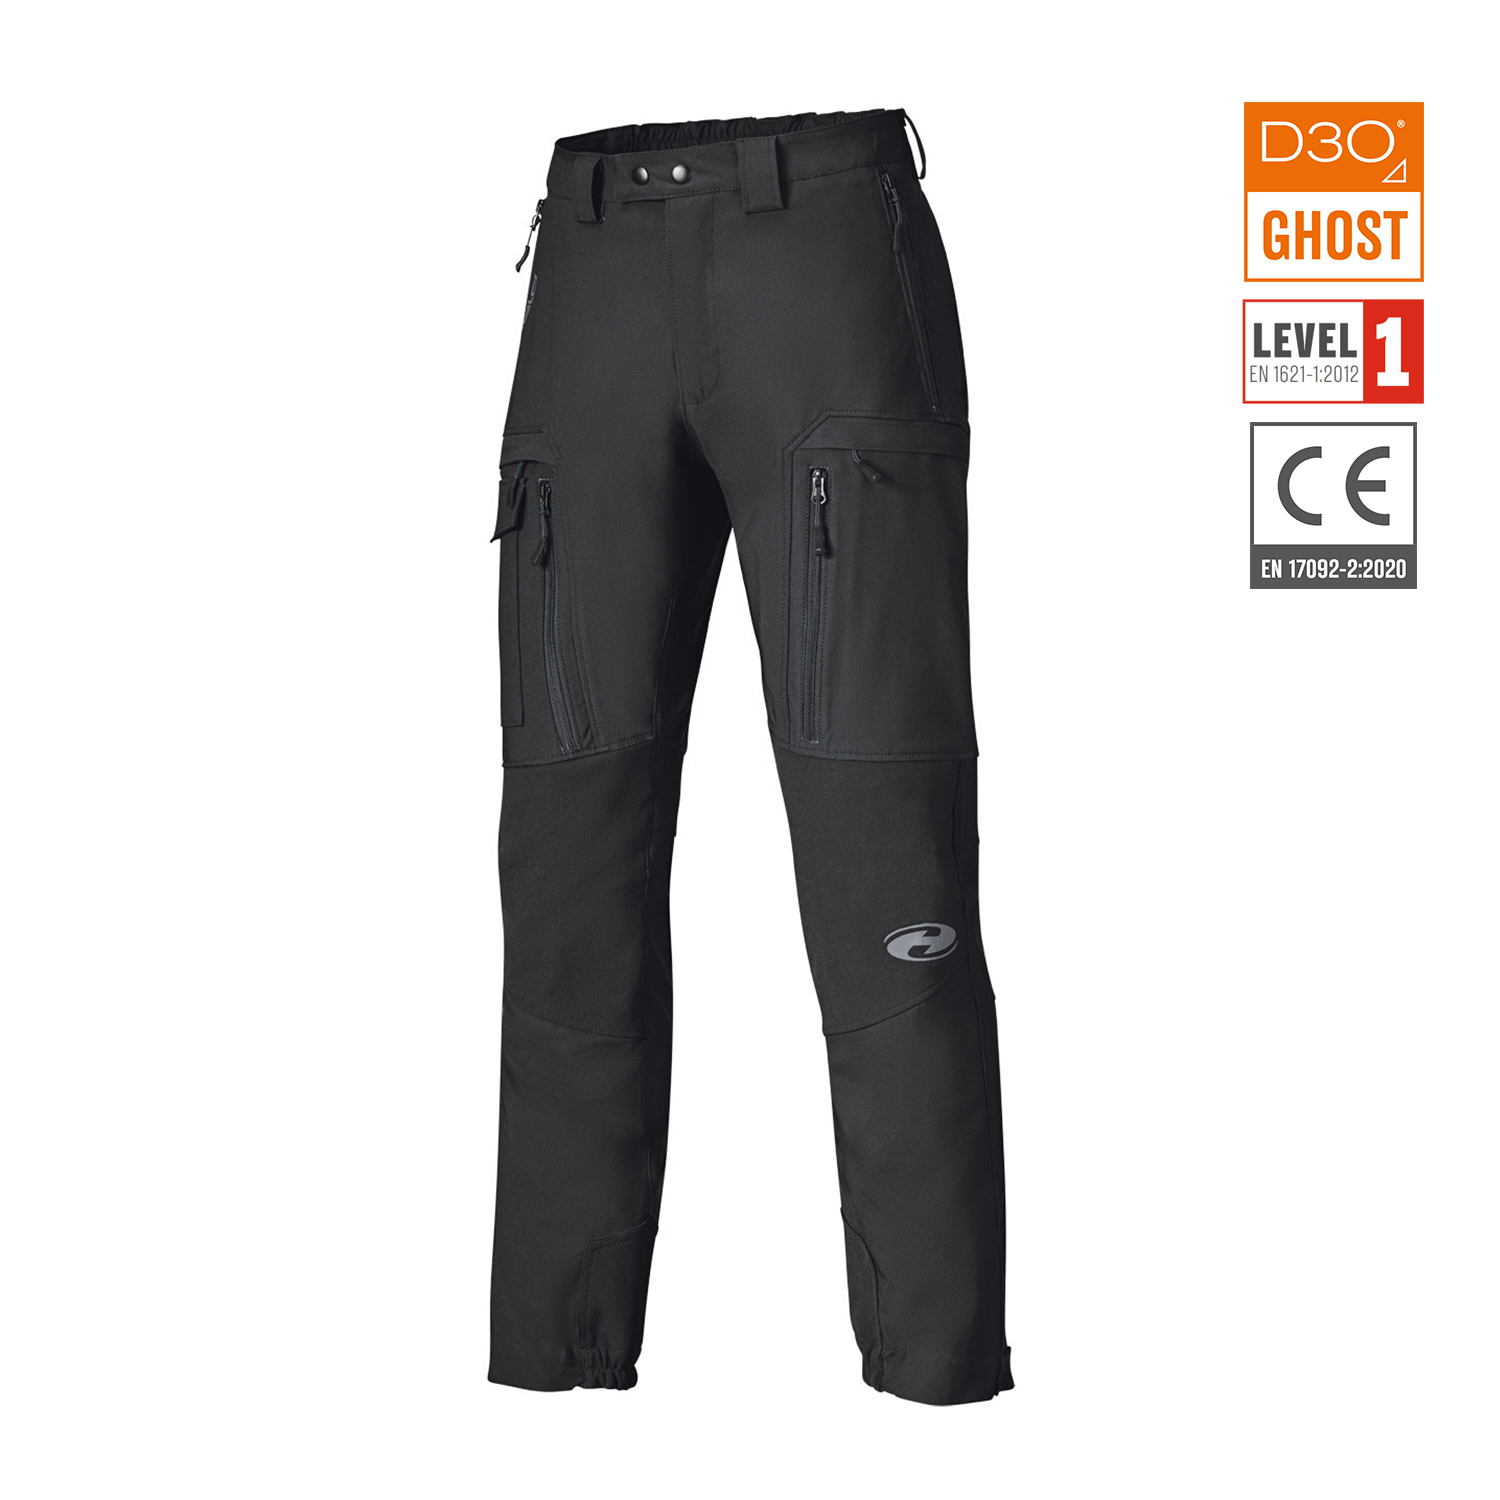 Held Dragger Pants Black - Available in Various Sizes